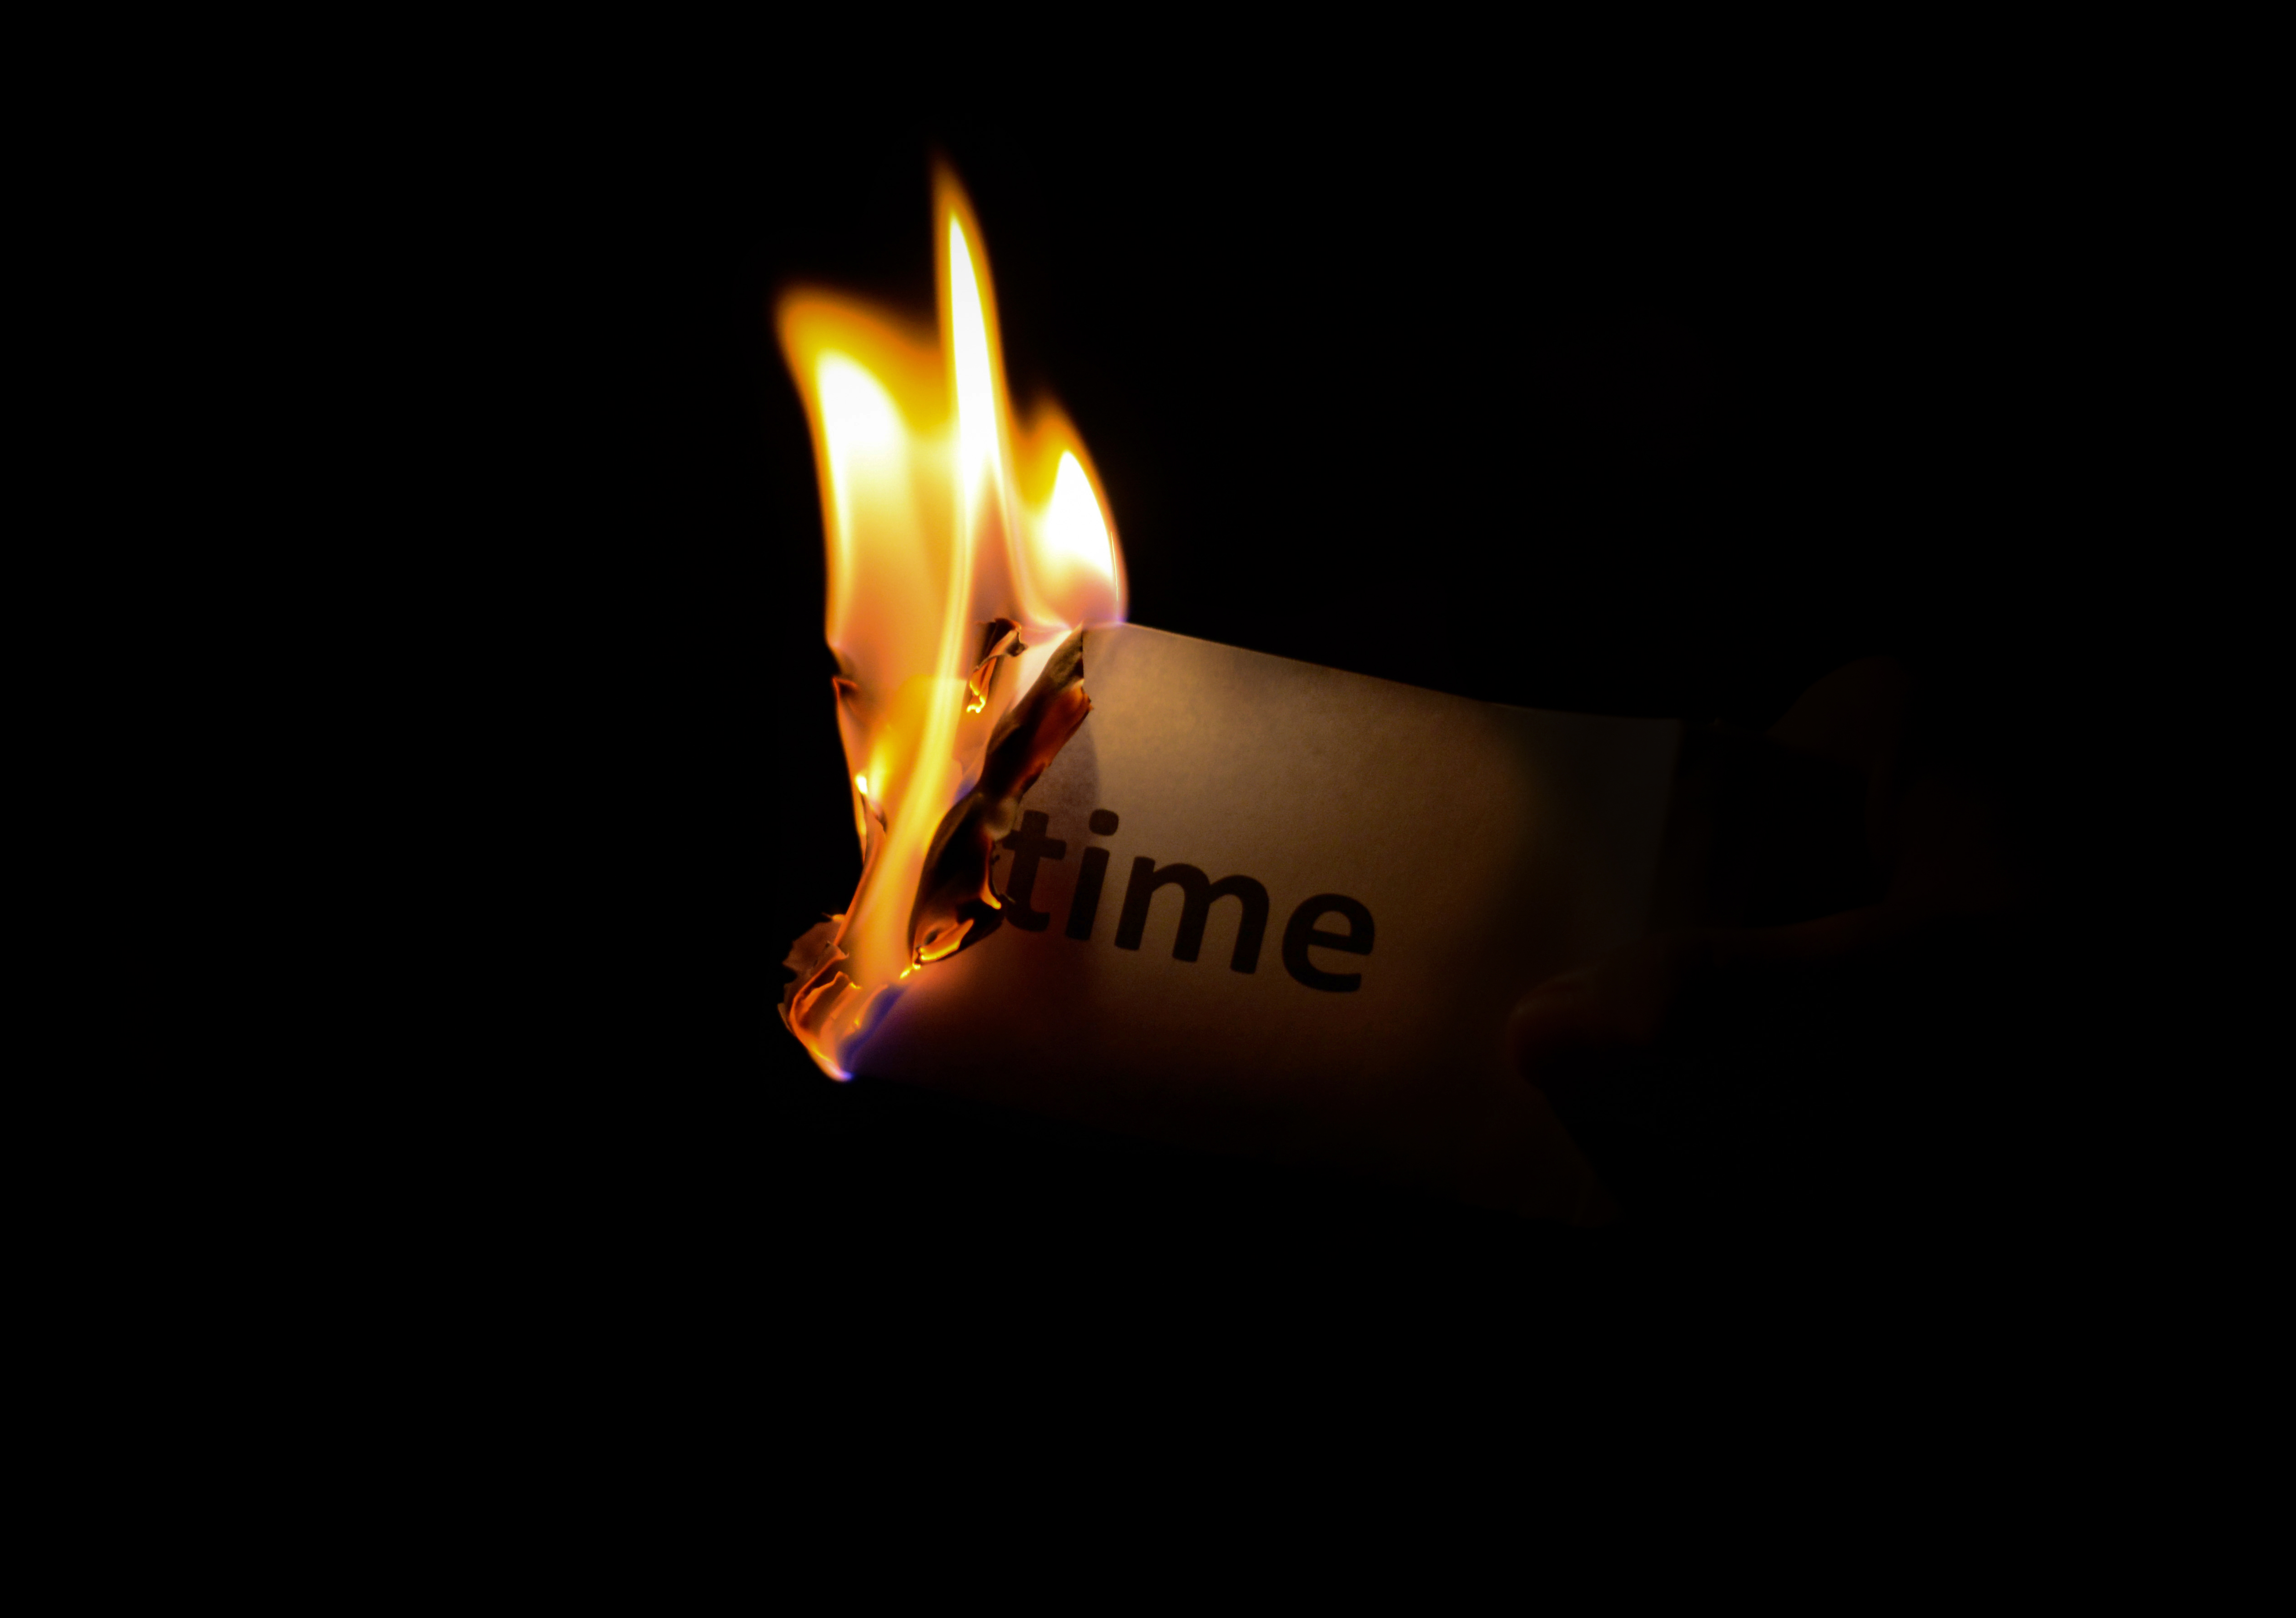 inspiration, time, words, it's time, fire